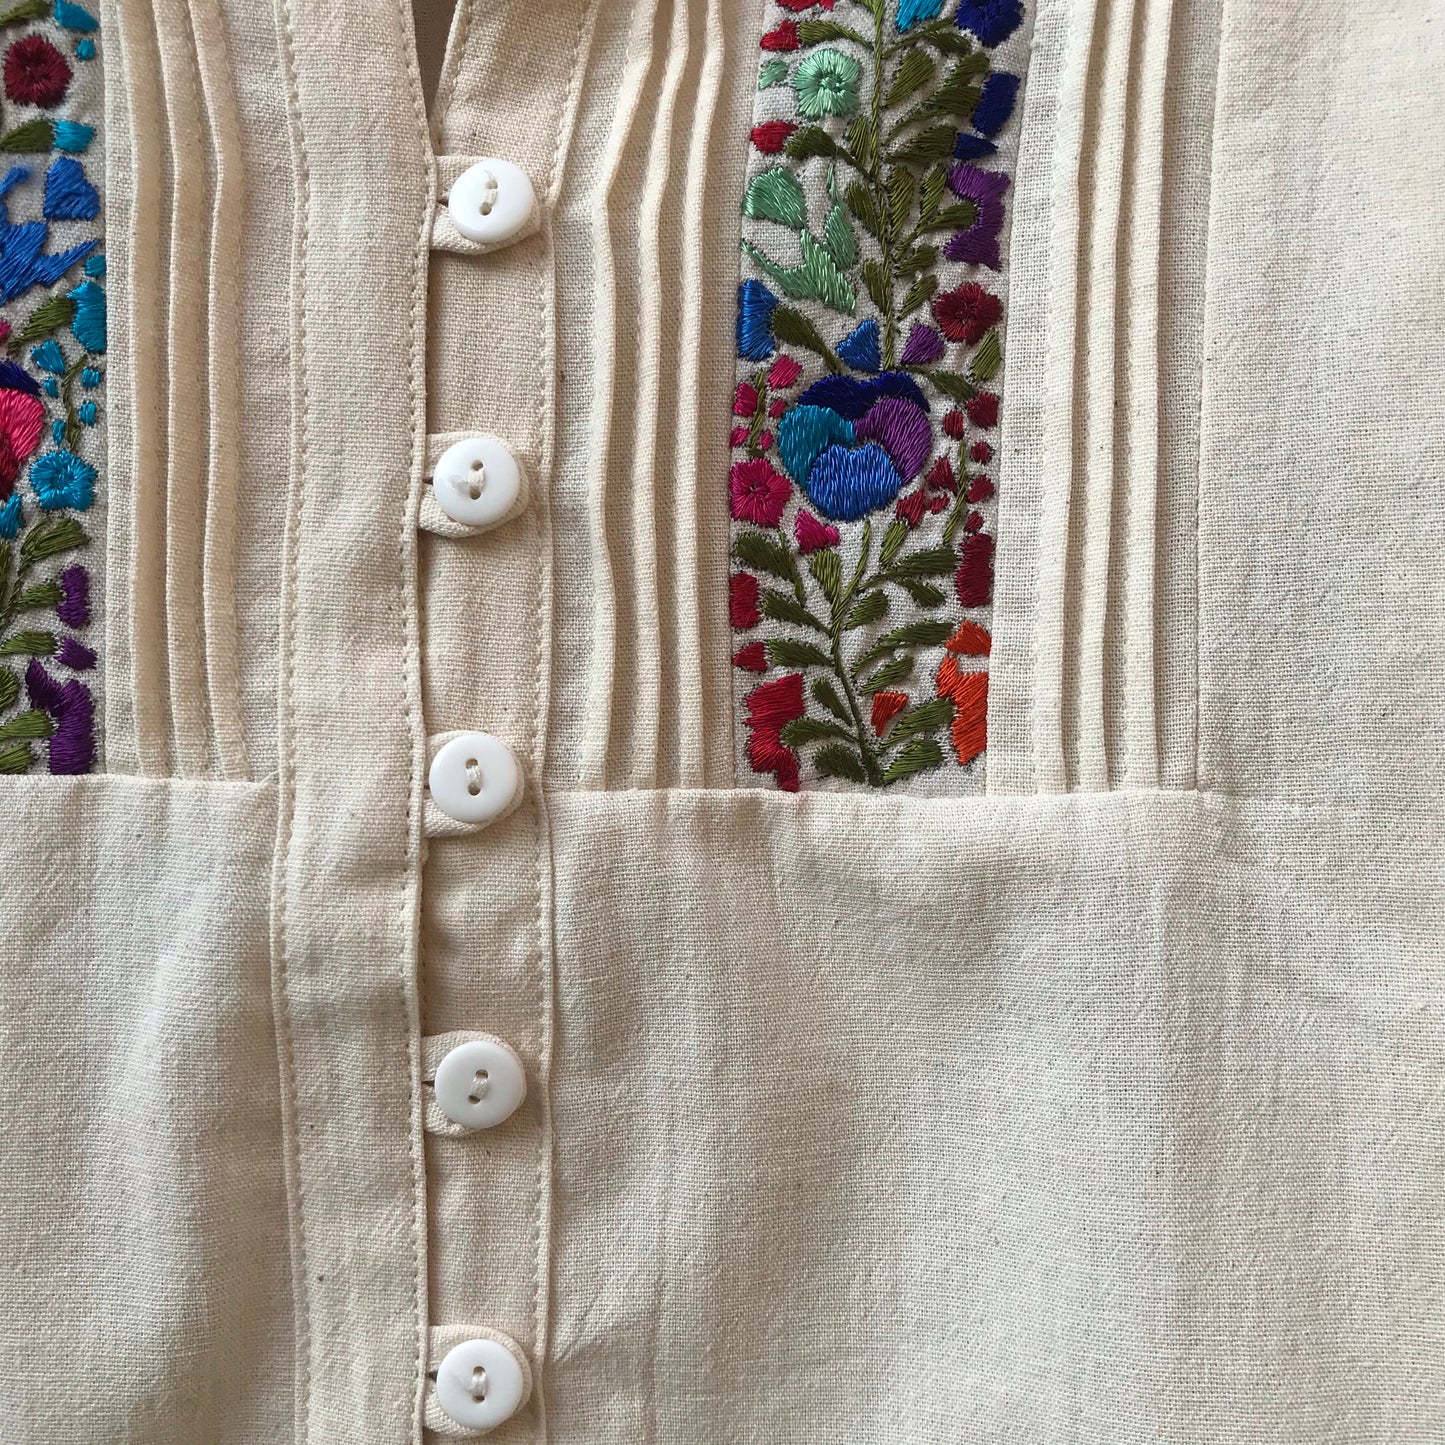 Women’s Embroidered Button-Down in Natural Cotton